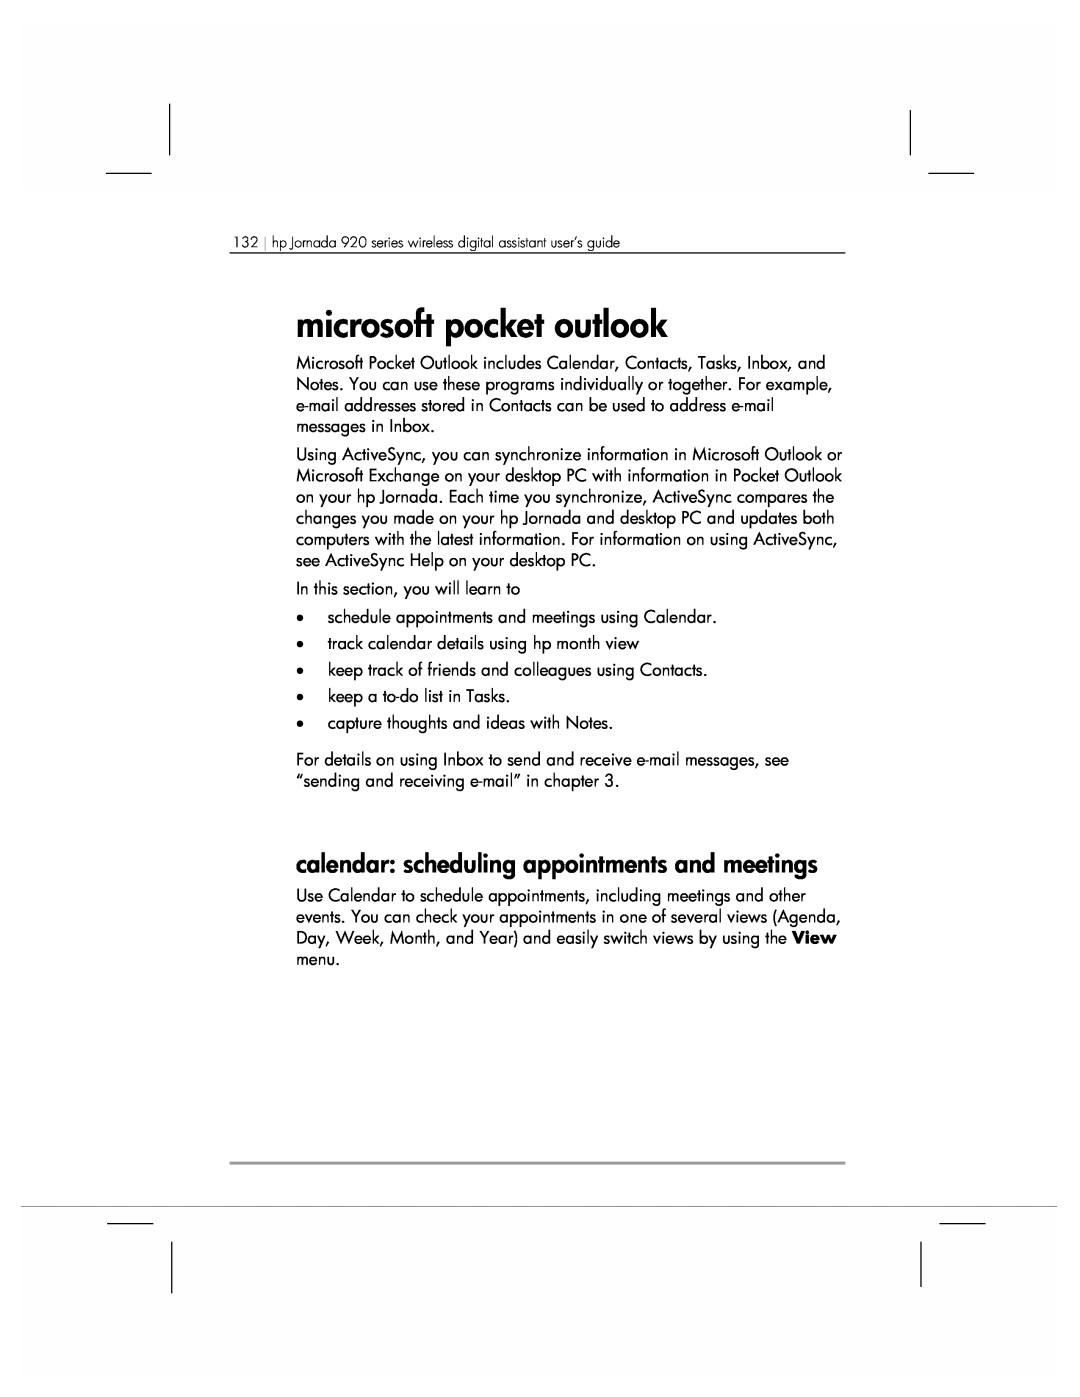 HP 920 manual microsoft pocket outlook, calendar scheduling appointments and meetings 